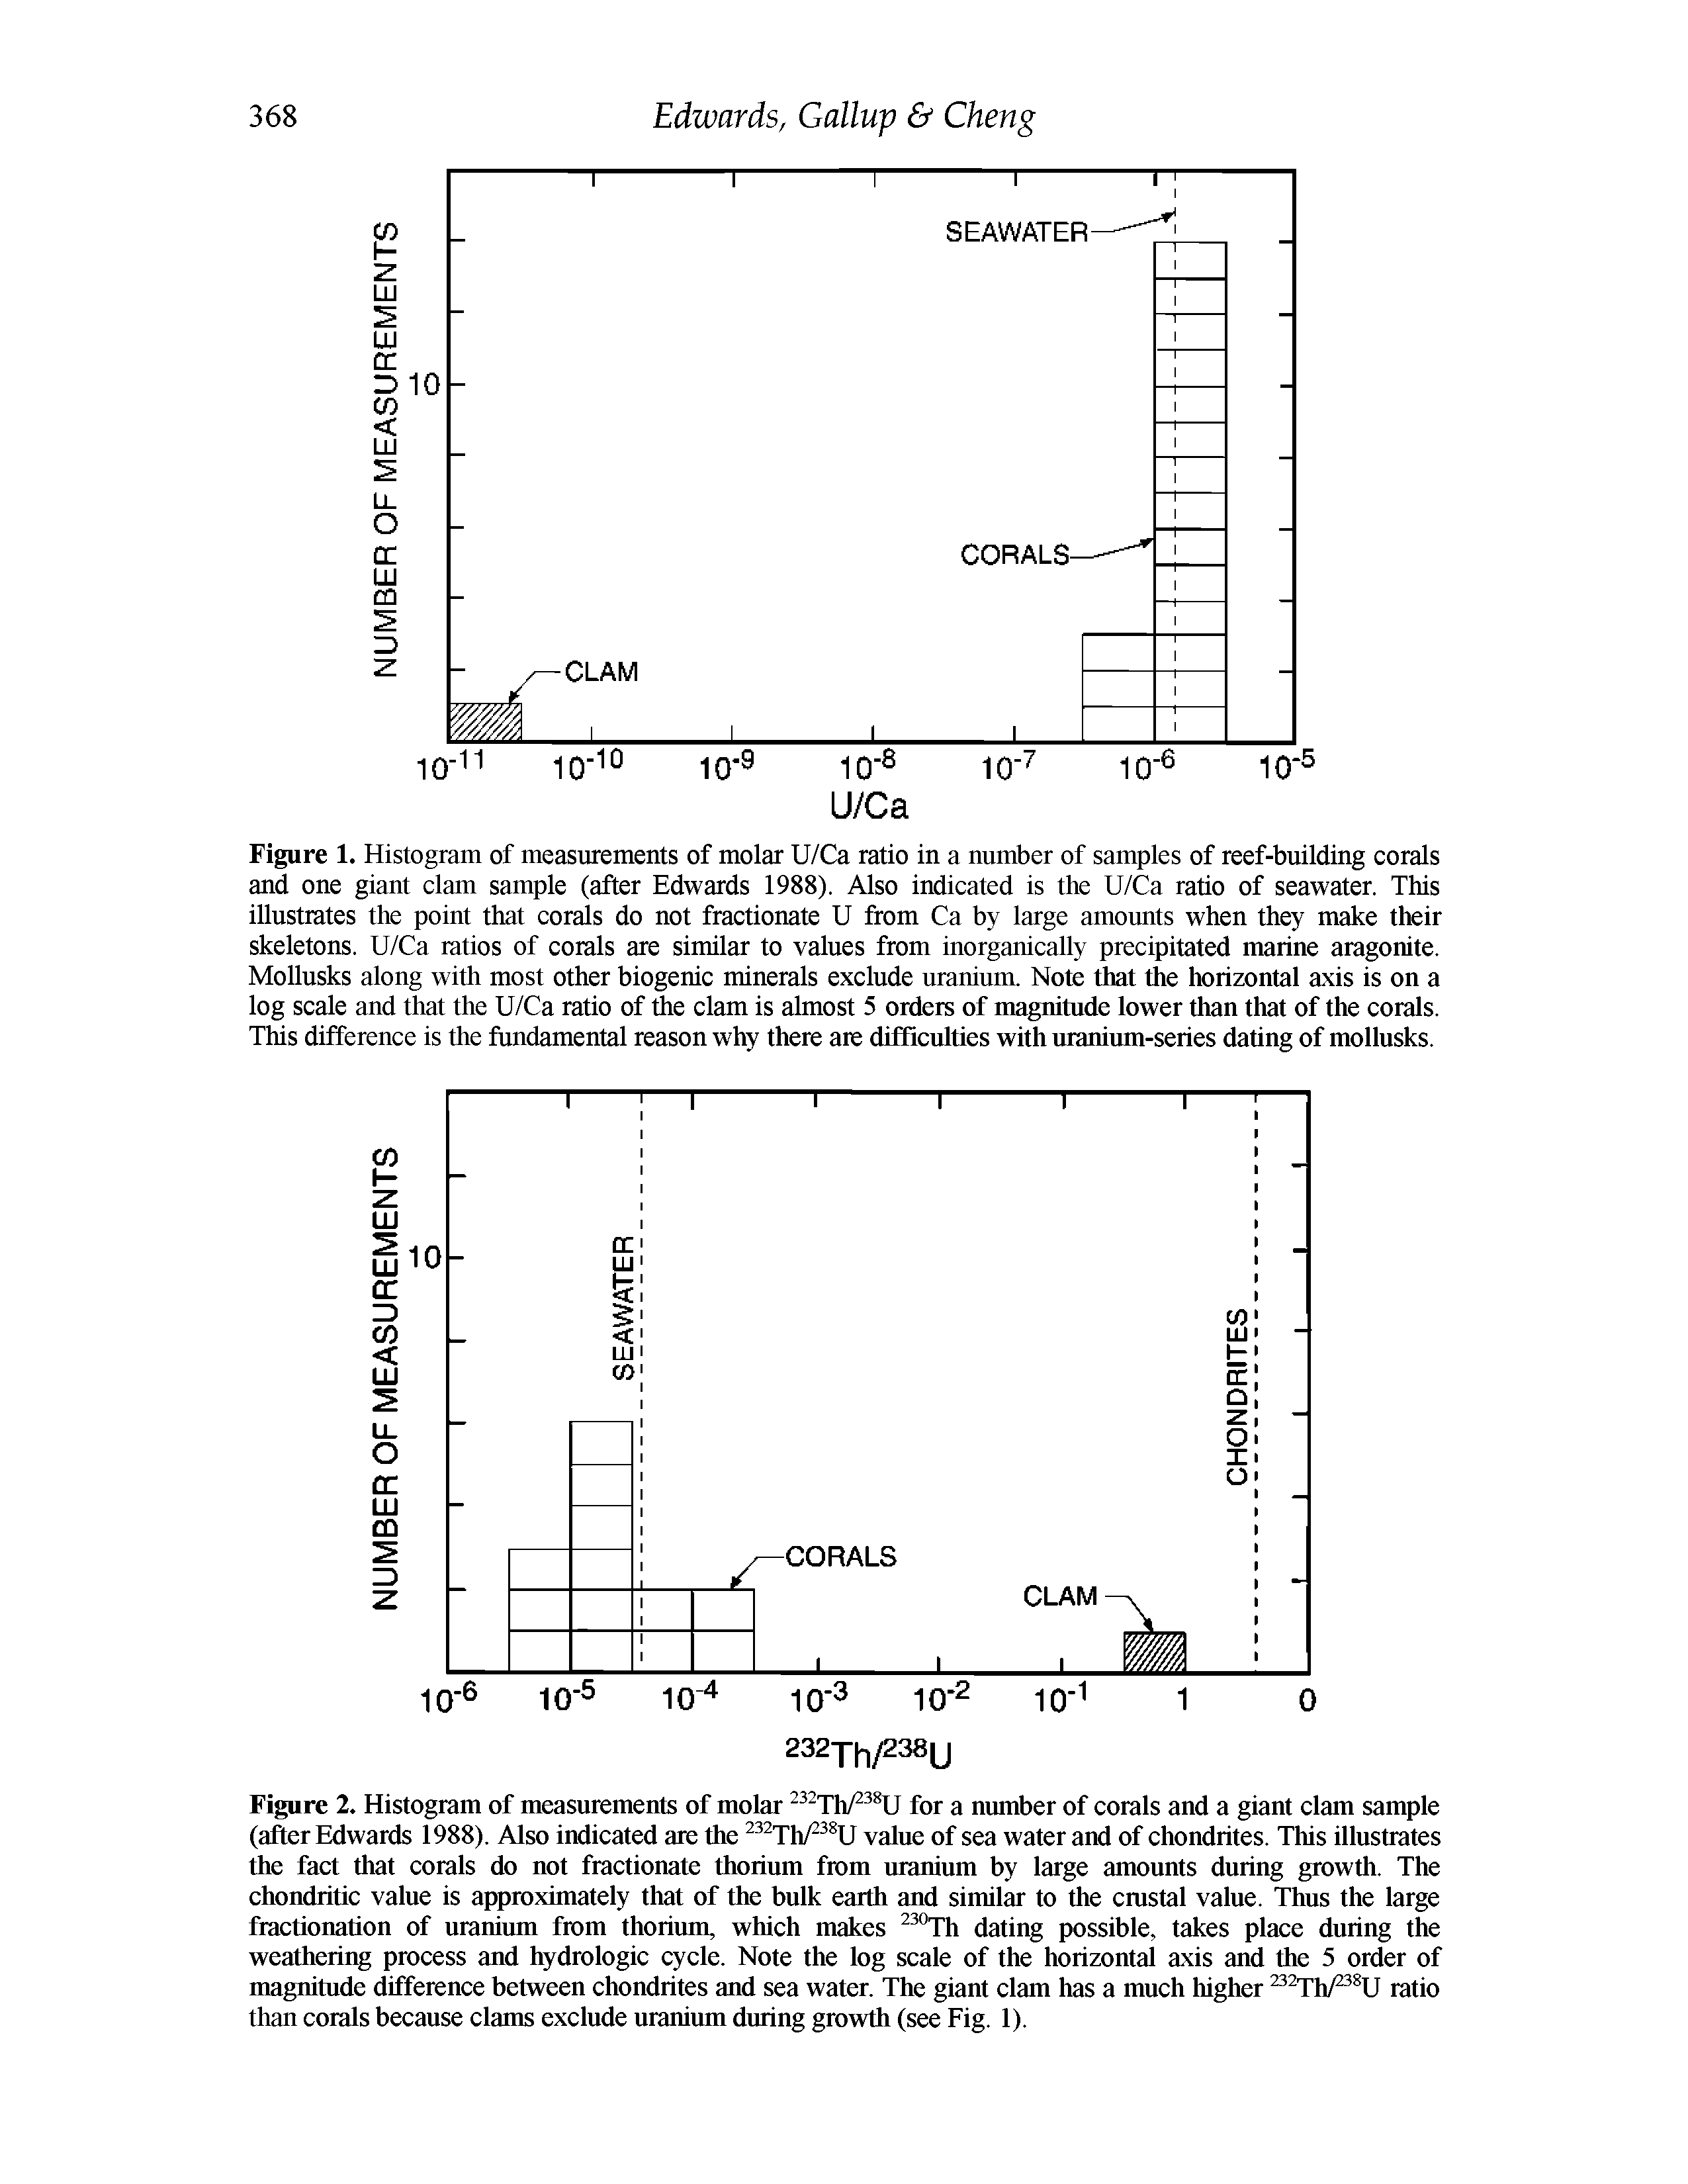 Figure 1. Histogram of measurements of molar U/Ca ratio in a number of samples of reef-building corals and one giant clam sample (after Edwards 1988). Also indicated is the U/Ca ratio of seawater. This illustrates the point that corals do not fractionate U from Ca by large amounts when they make their skeletons. U/Ca ratios of corals are similar to values from inorganically precipitated marine aragonite. Mollusks along with most other biogenic minerals exclude uranium. Note that the horizontal axis is on a log scale and that the U/Ca ratio of the clam is almost 5 orders of magnitude lower than that of the corals. This difference is the fundamental reason why there are difficulties with uranium-series dating of mollusks.